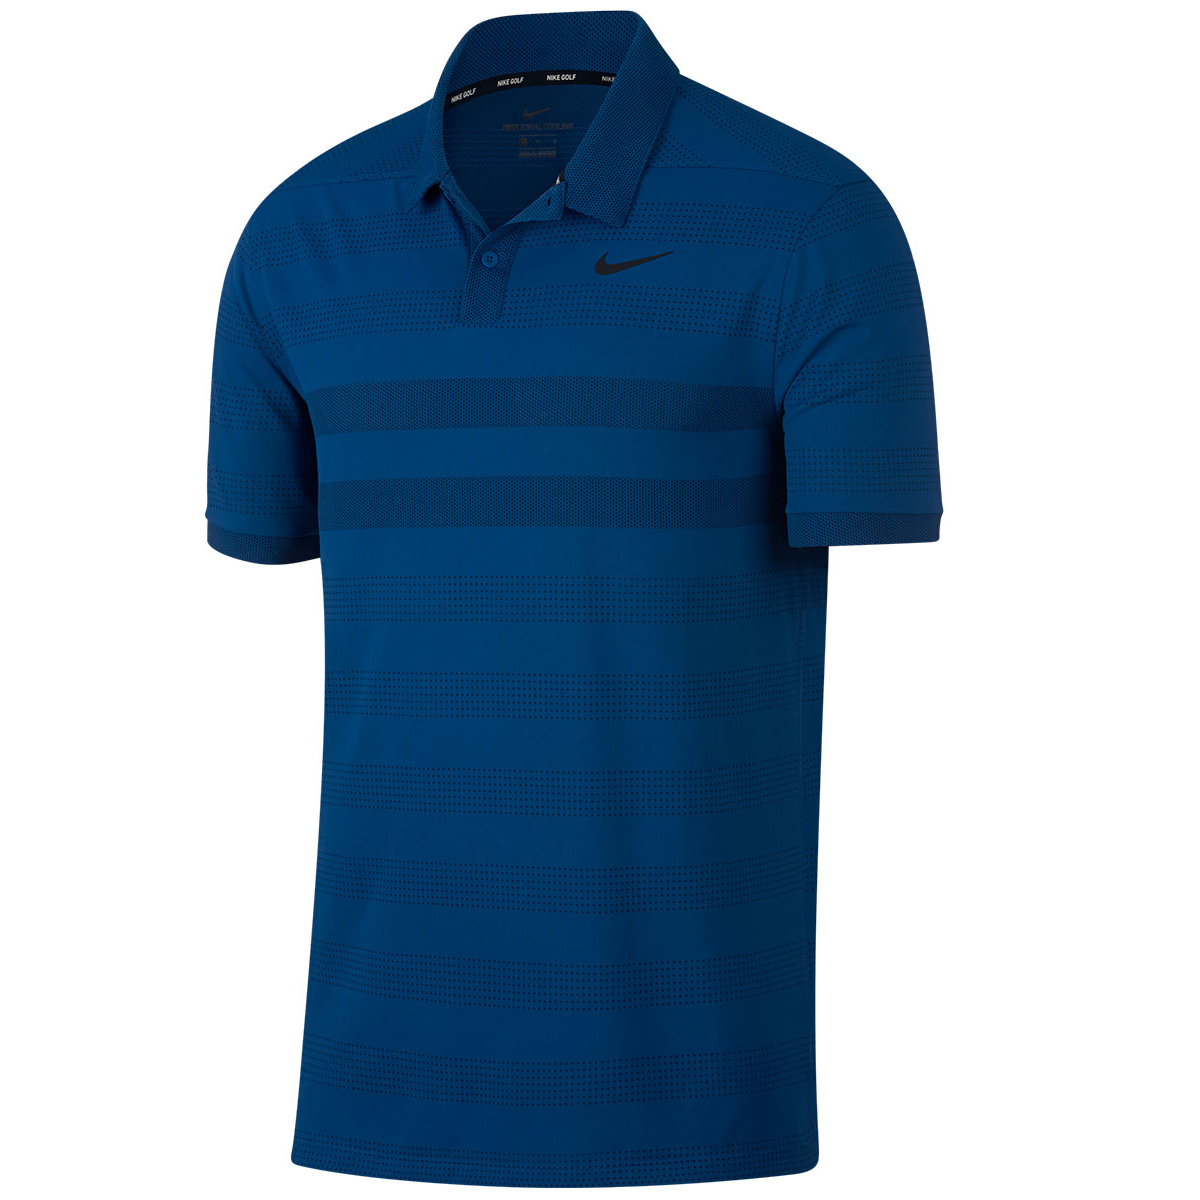 Nike Golf Zonal Cooling Striped Polo Shirt from american golf